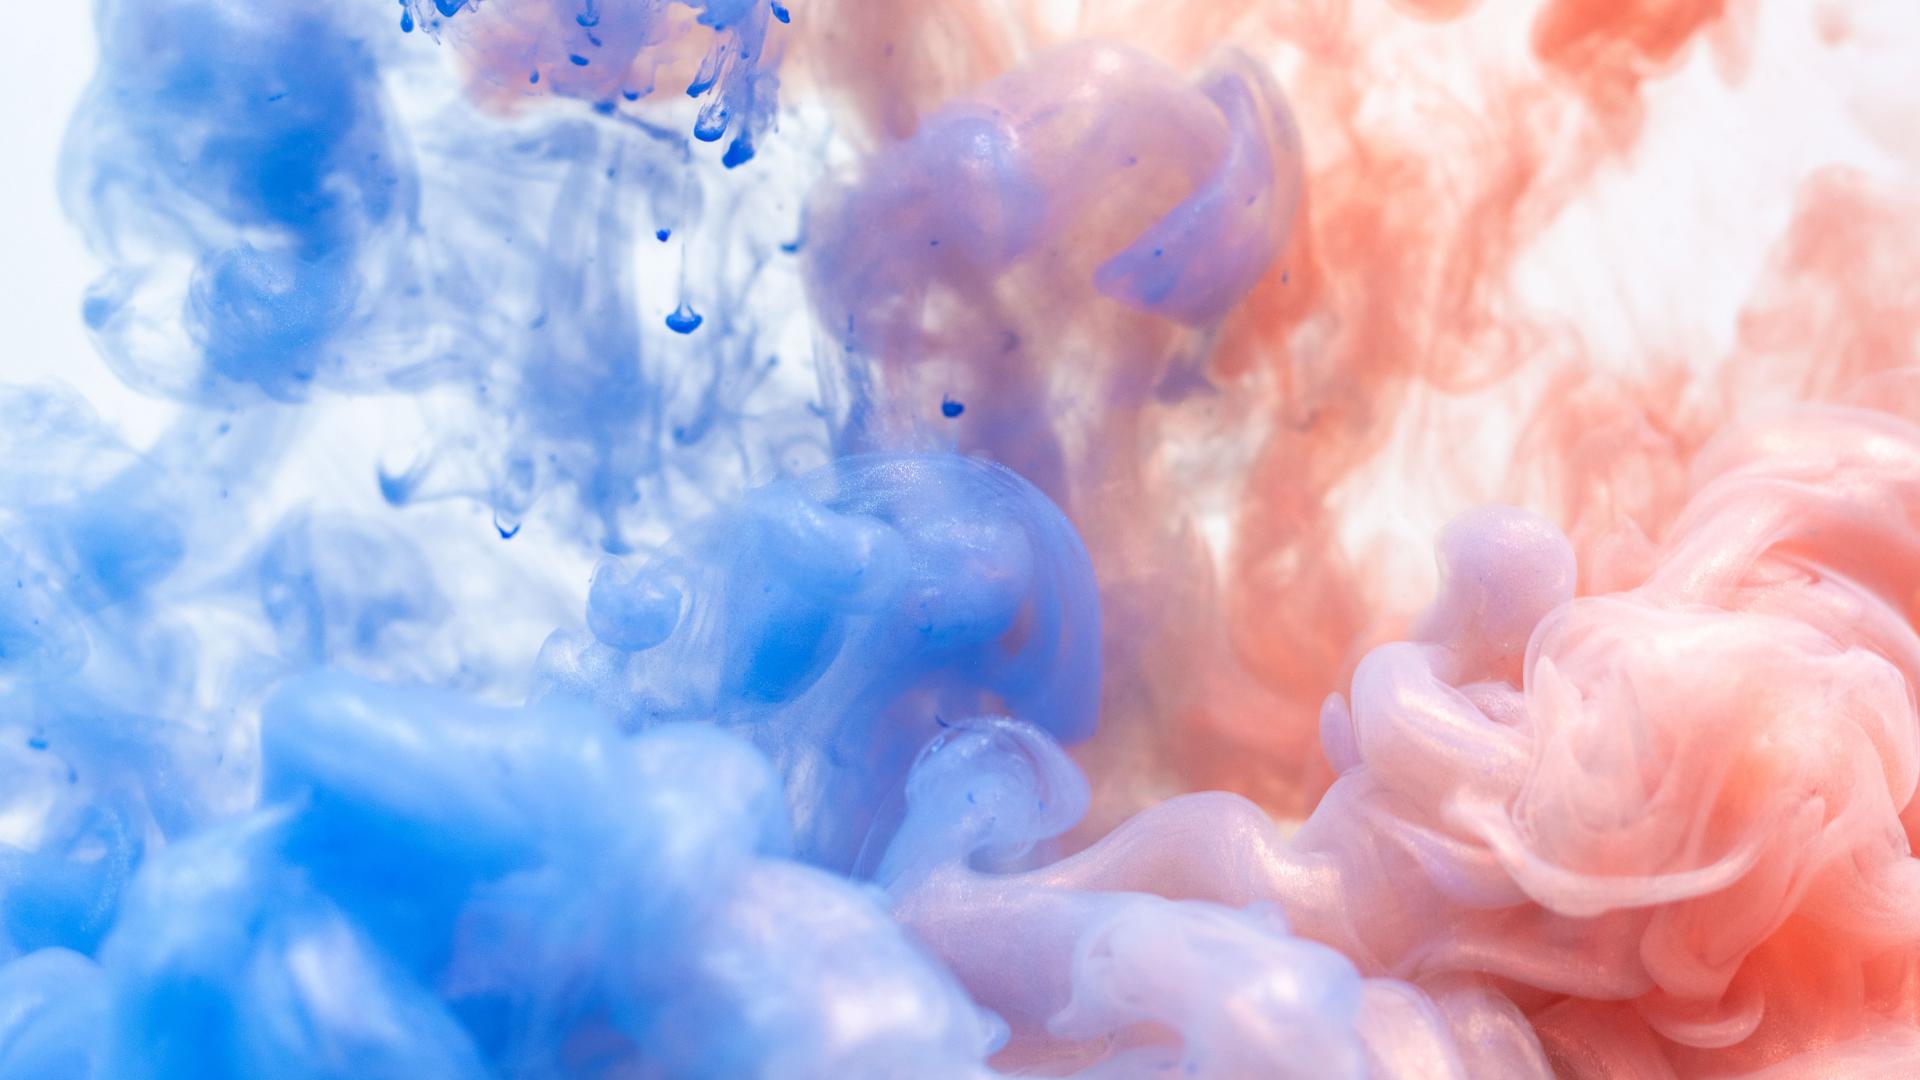 image of watercolour paint splashed into water, blue on left side red on right side